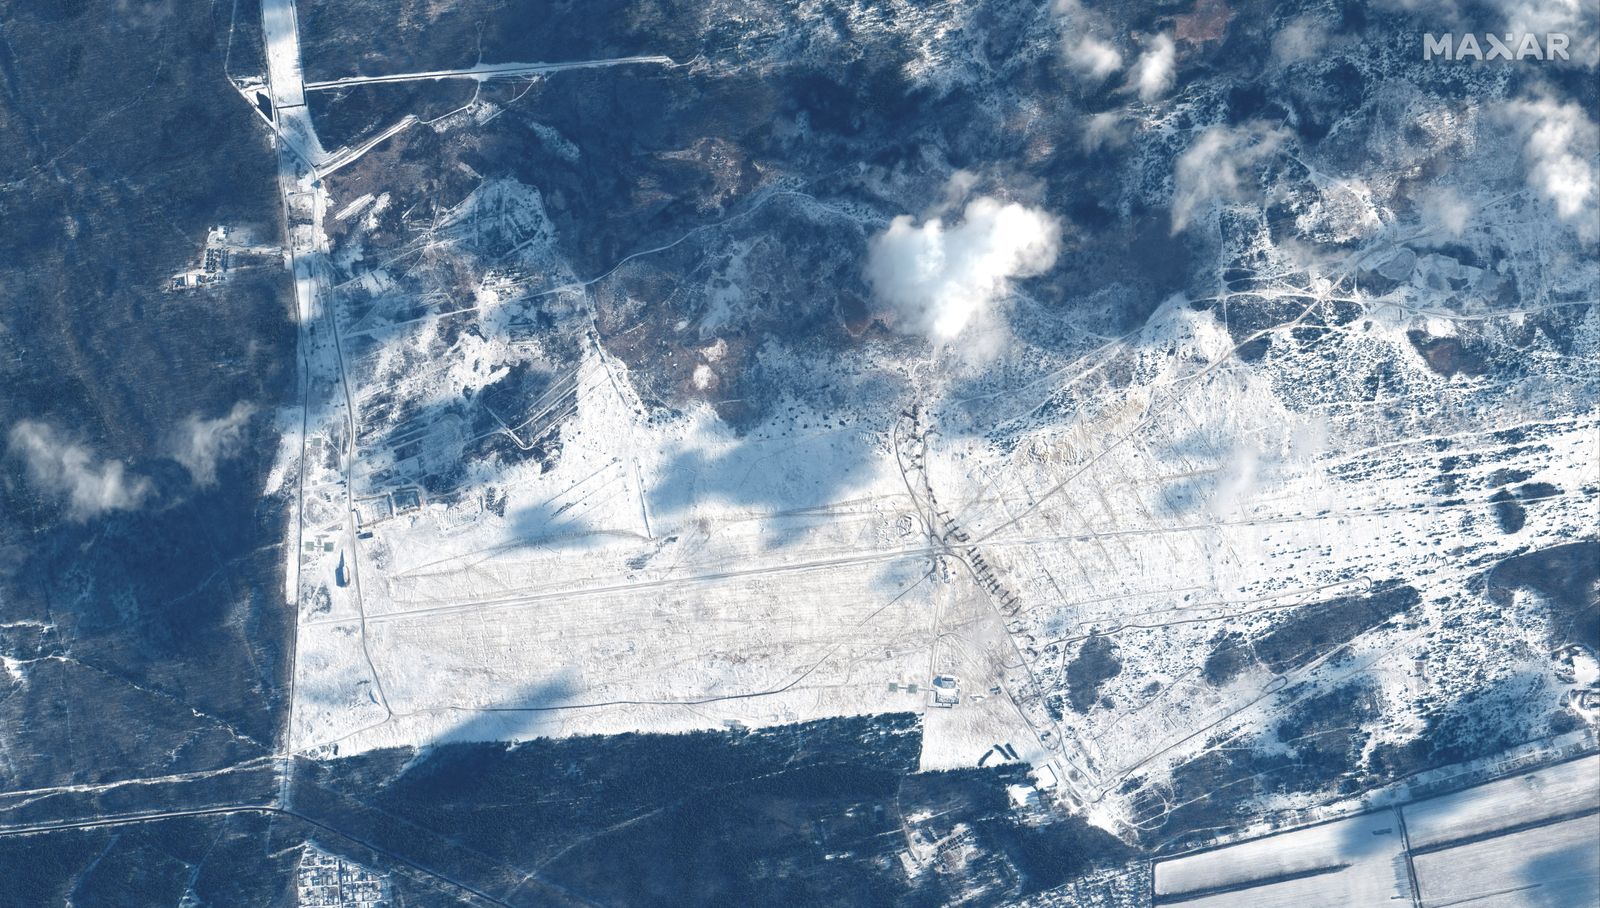 An overview of the Brestsky training ground, Belarus is seen in this Maxar satellite image taken on January 22, 2022 - via REUTERS